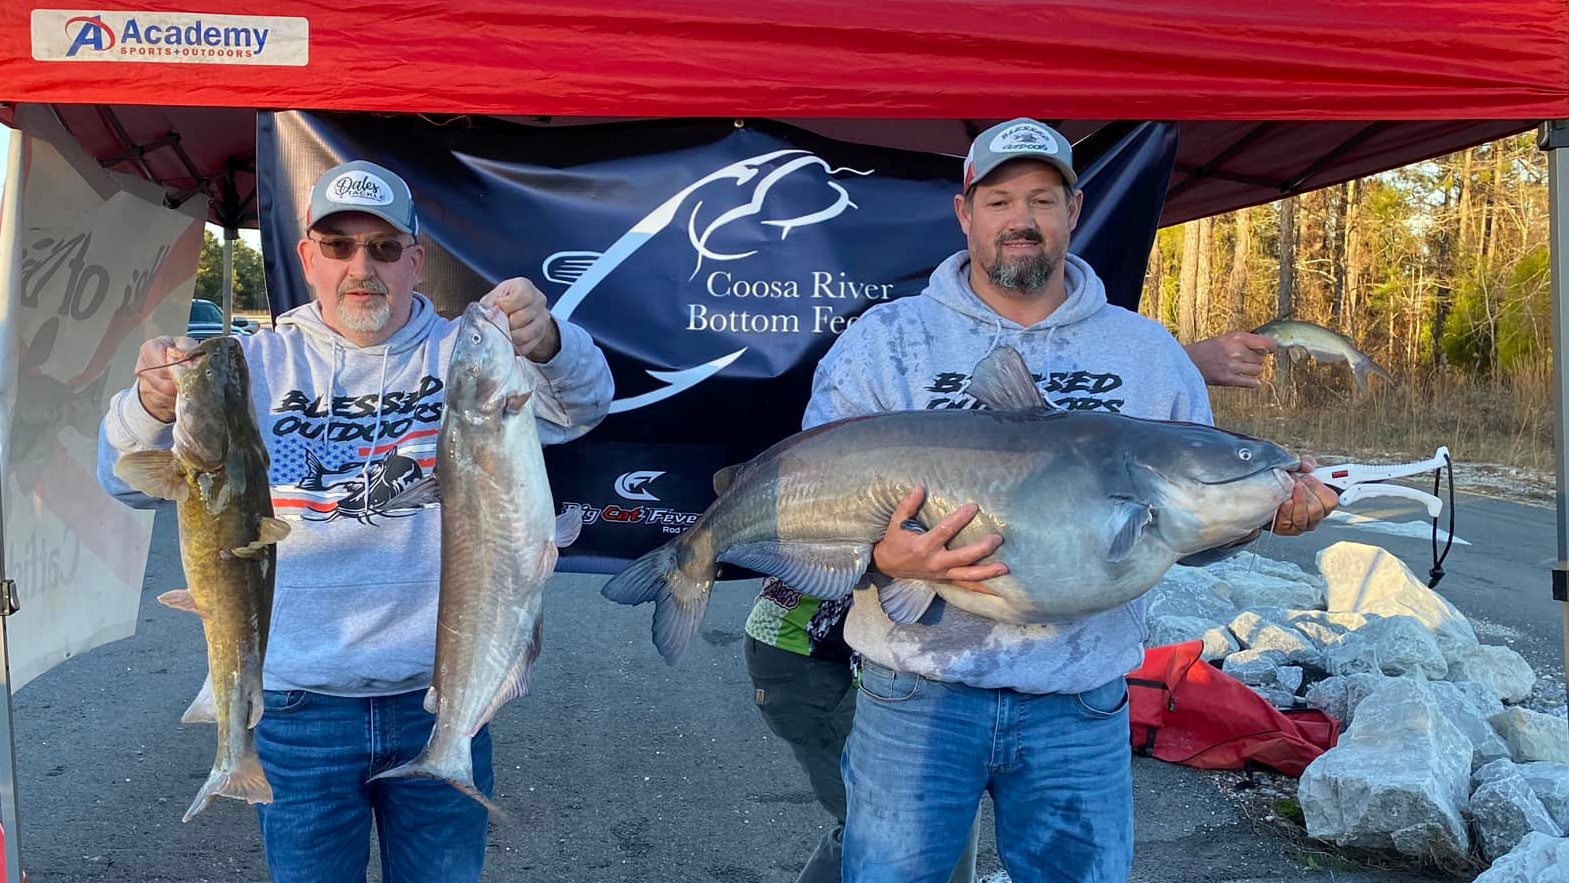 Coosa River Shootout—How They Fished - Catfish Now